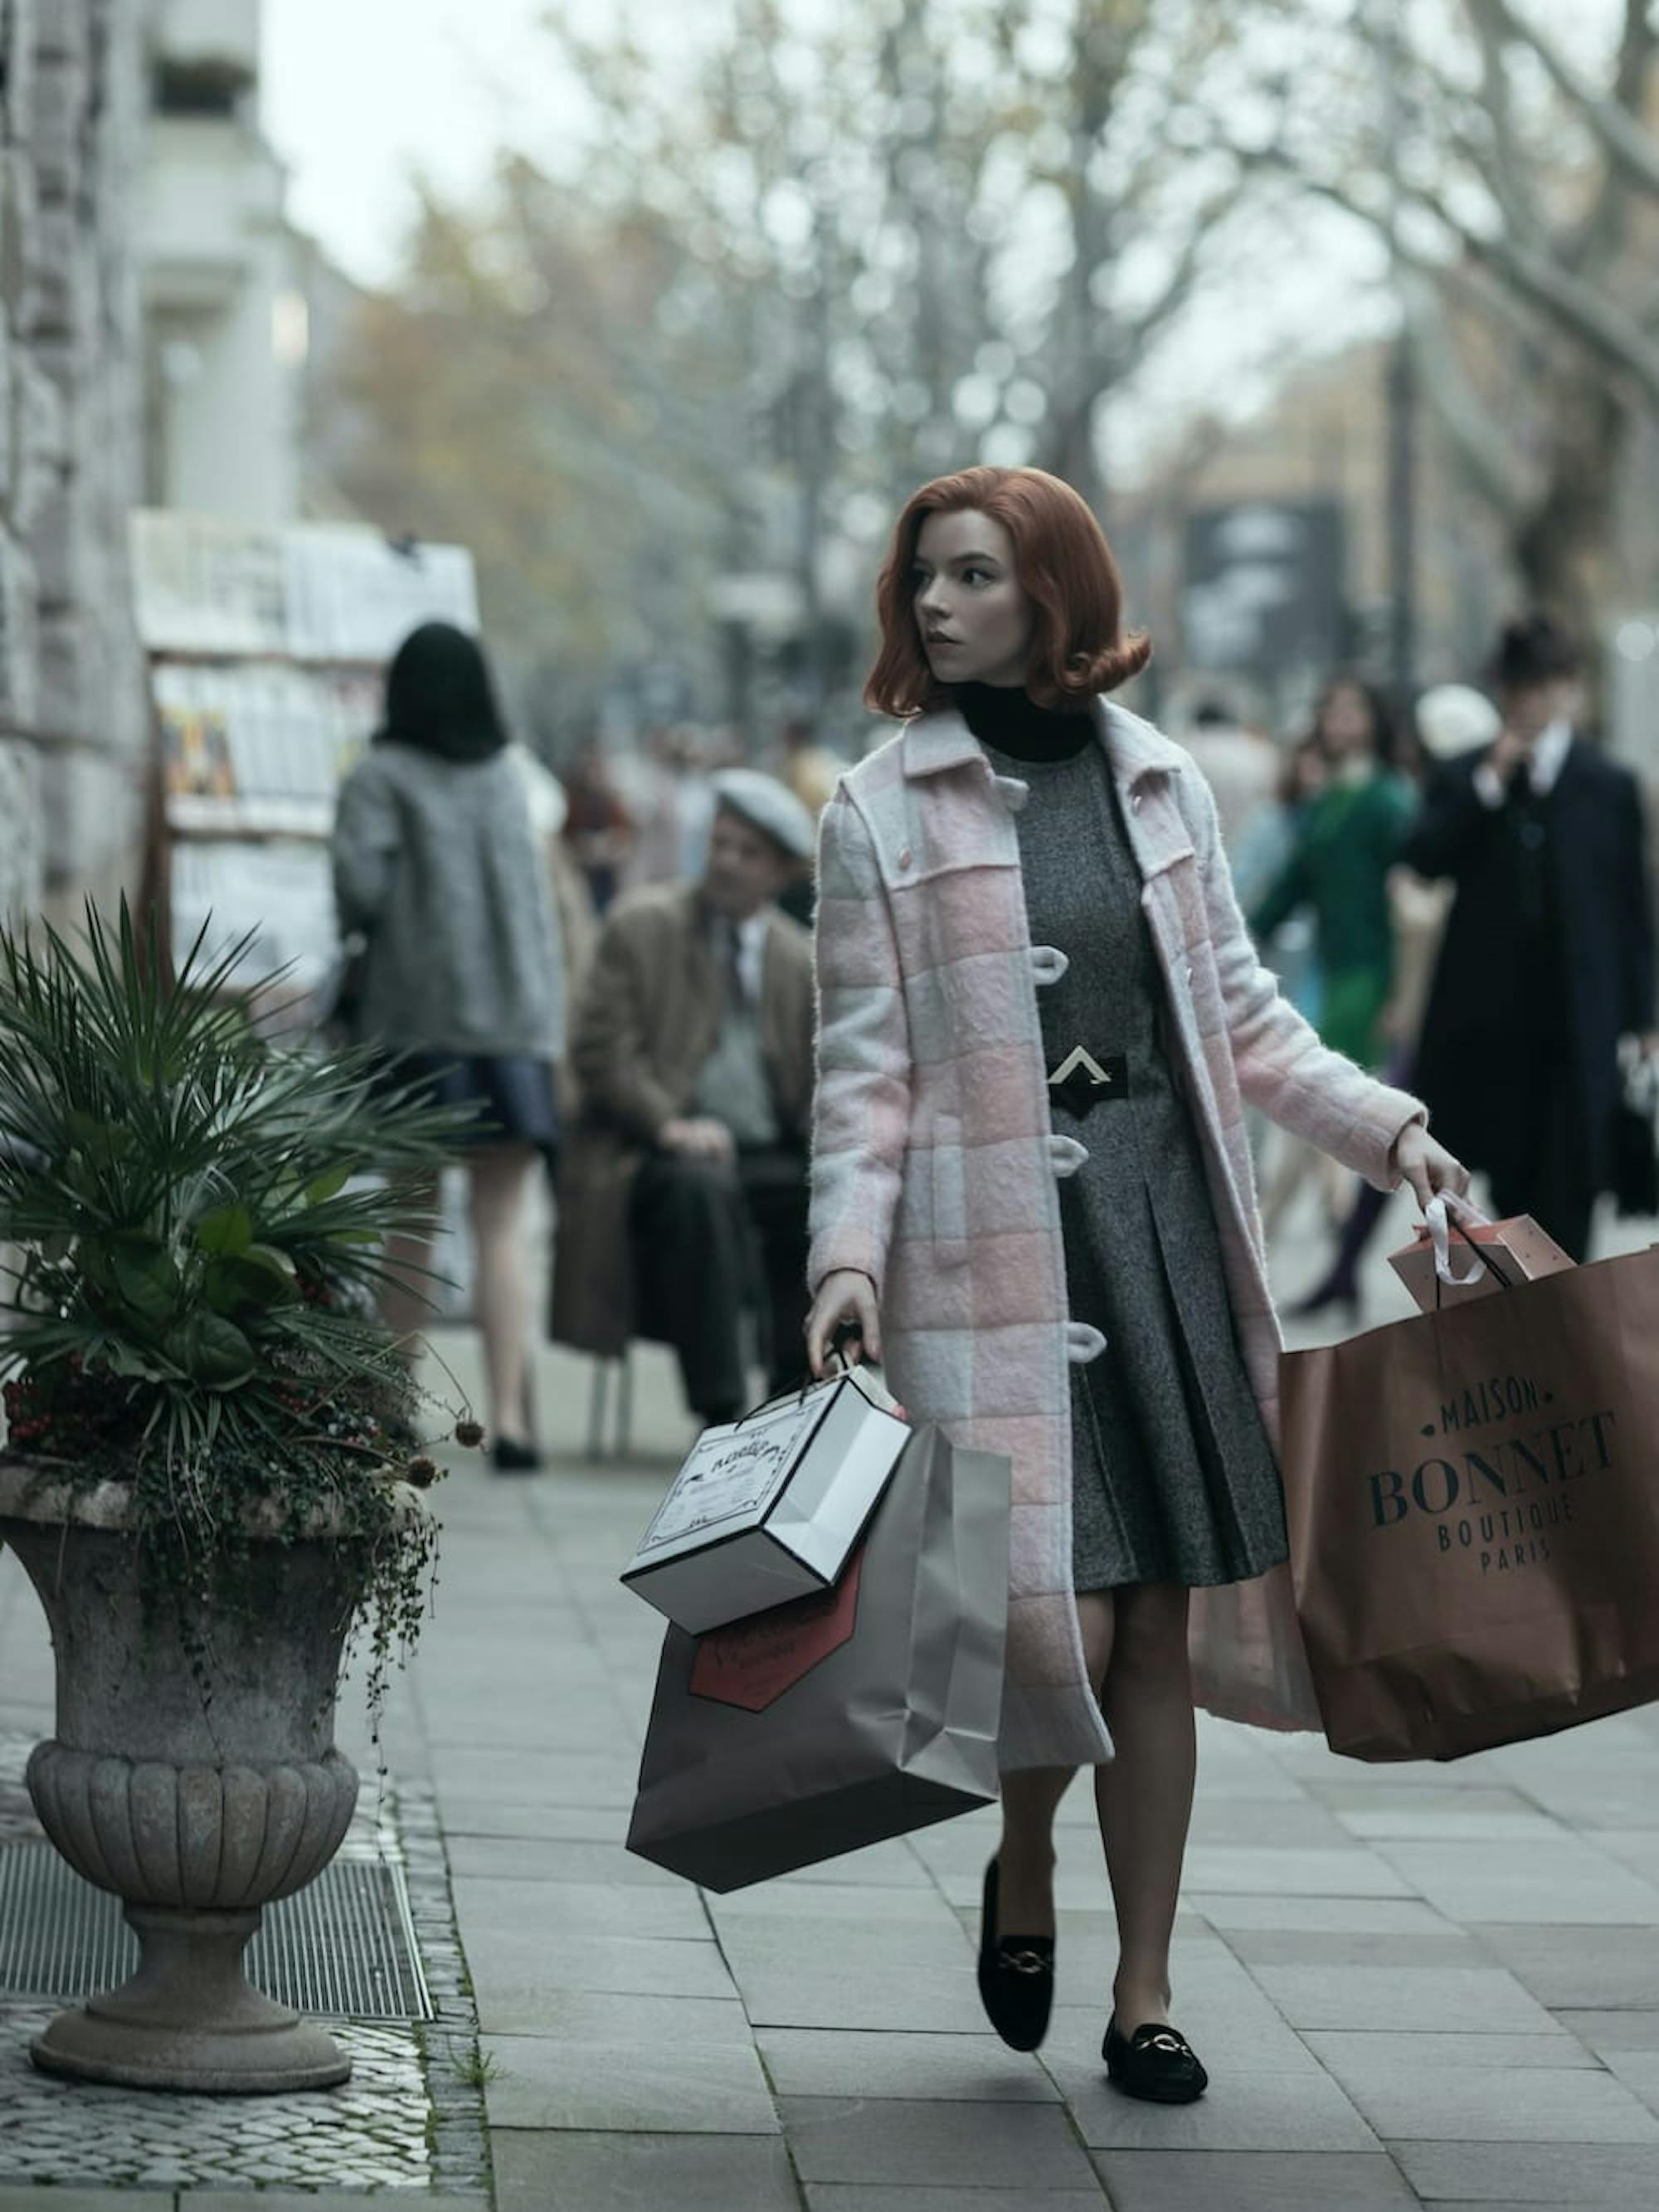 Beth Harmon (Anya Taylor-Joy) carries four shopping bags as she walks the streets of Paris. She wears a long white-and-pink checkered jacket that I’d love to borrow.